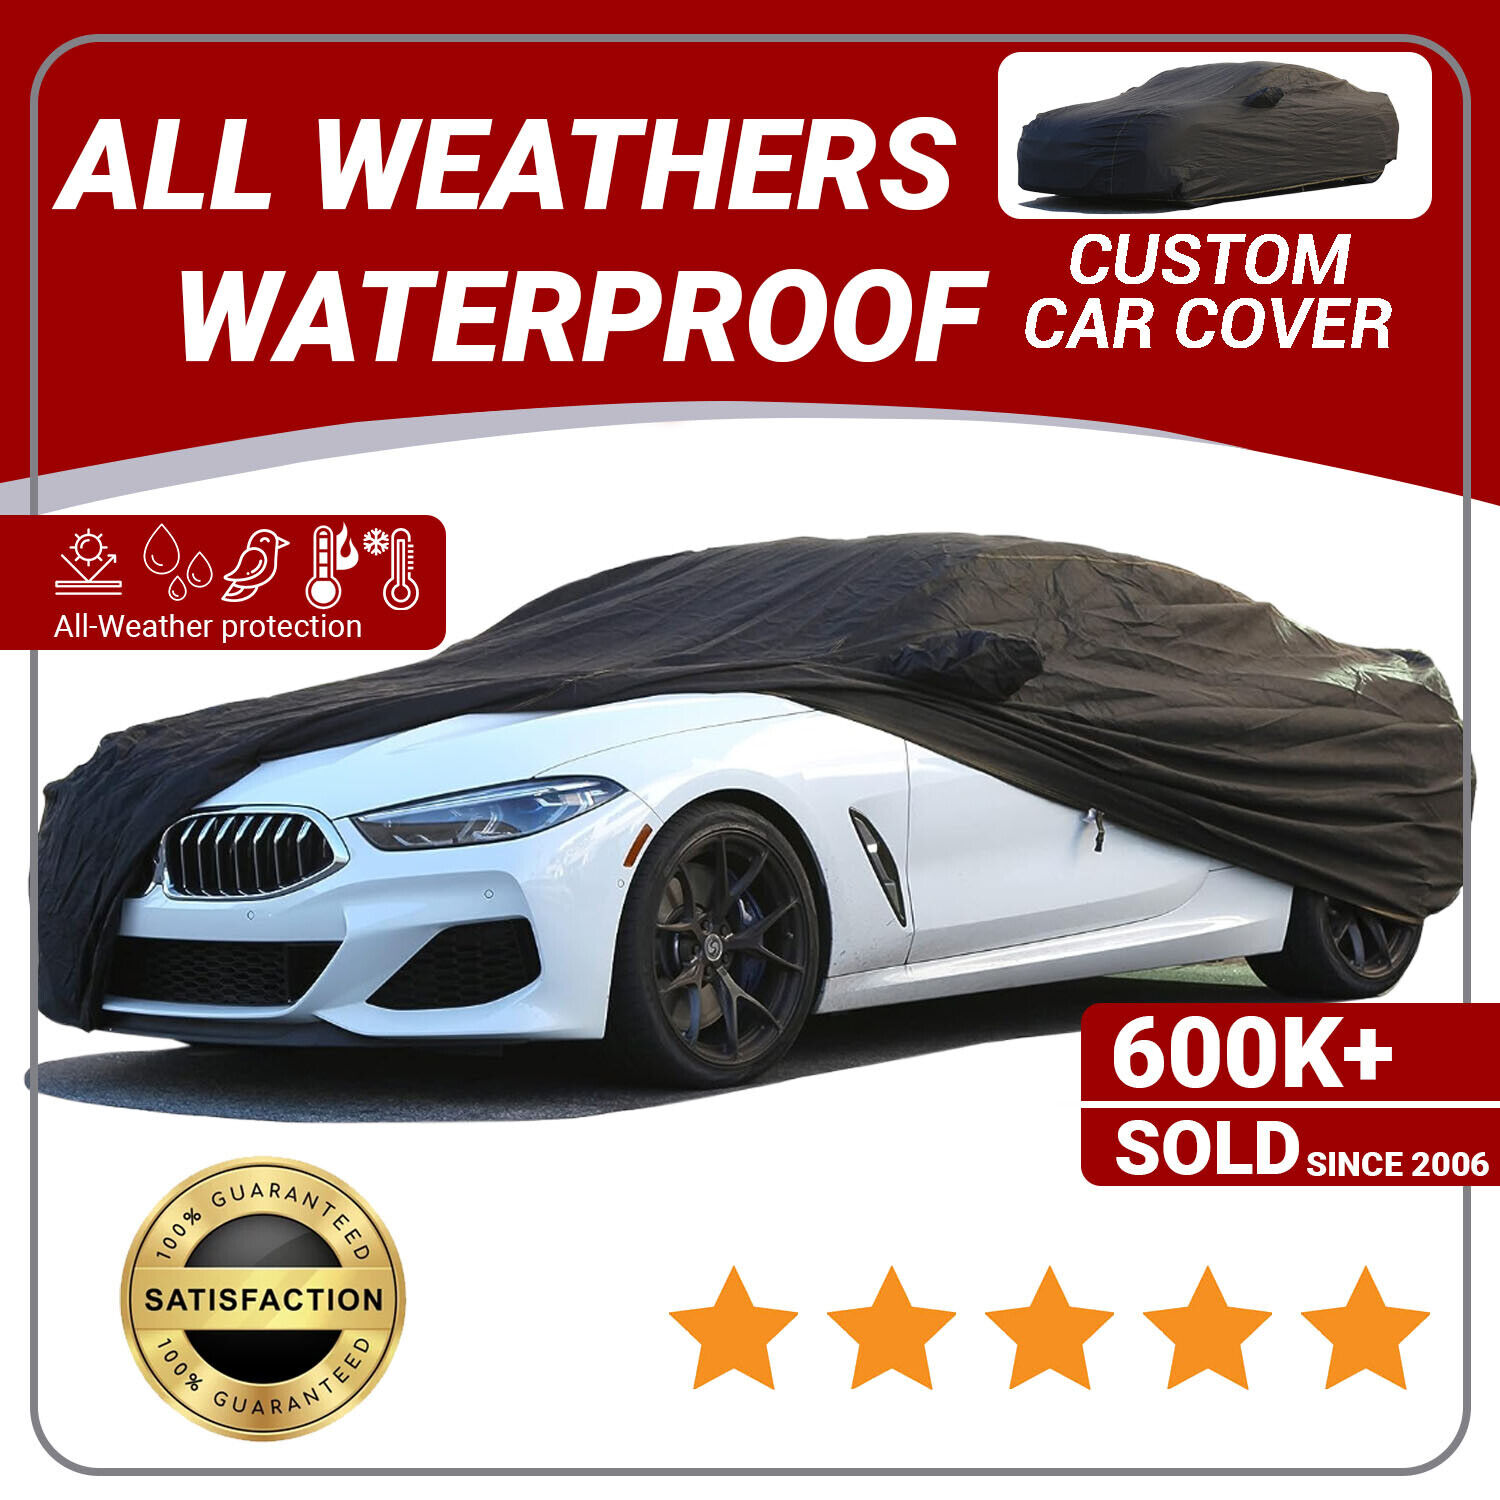 All Weathers Custom Car Cover For 2014 2015 2016 2017 2018 2019 2020 GMC Acadia